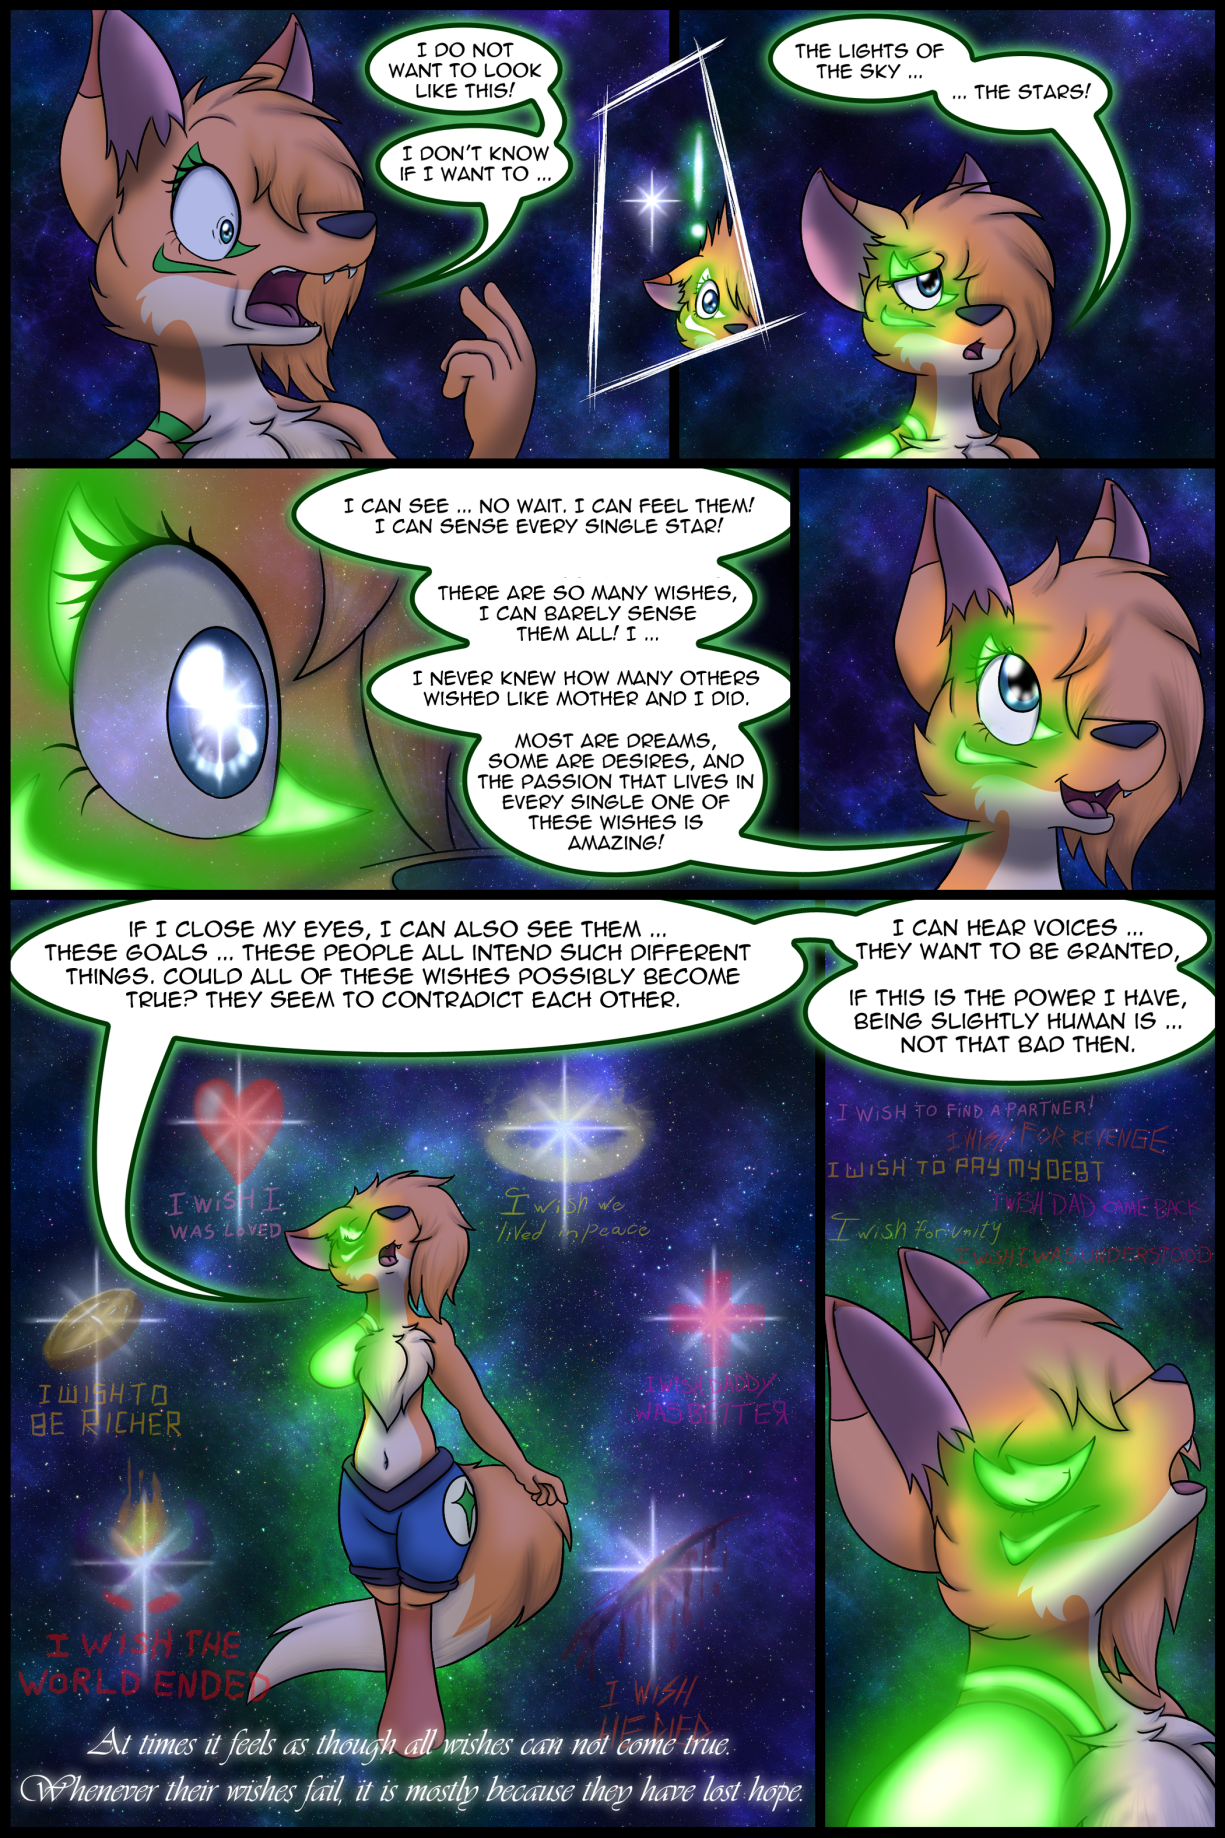 Ch1 Remastered Page 24-25 – That Feeling … – The many wishes